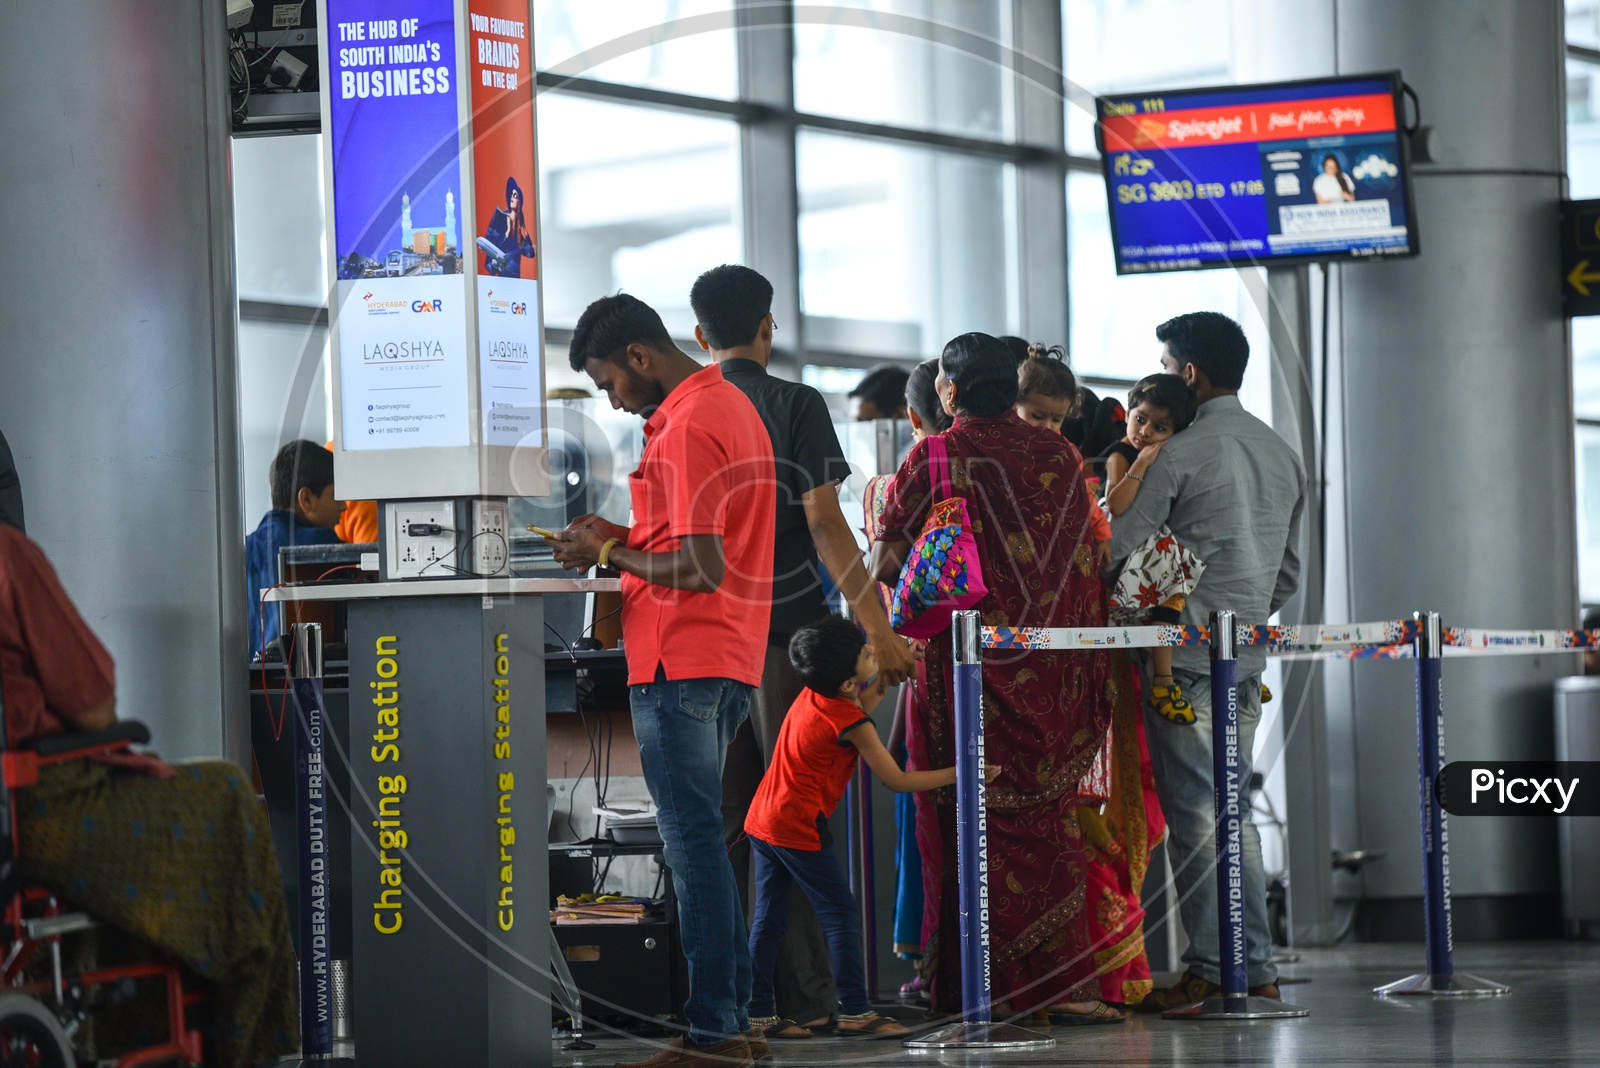 Passengers  Checking In at The Entry  Gates  In an Airport